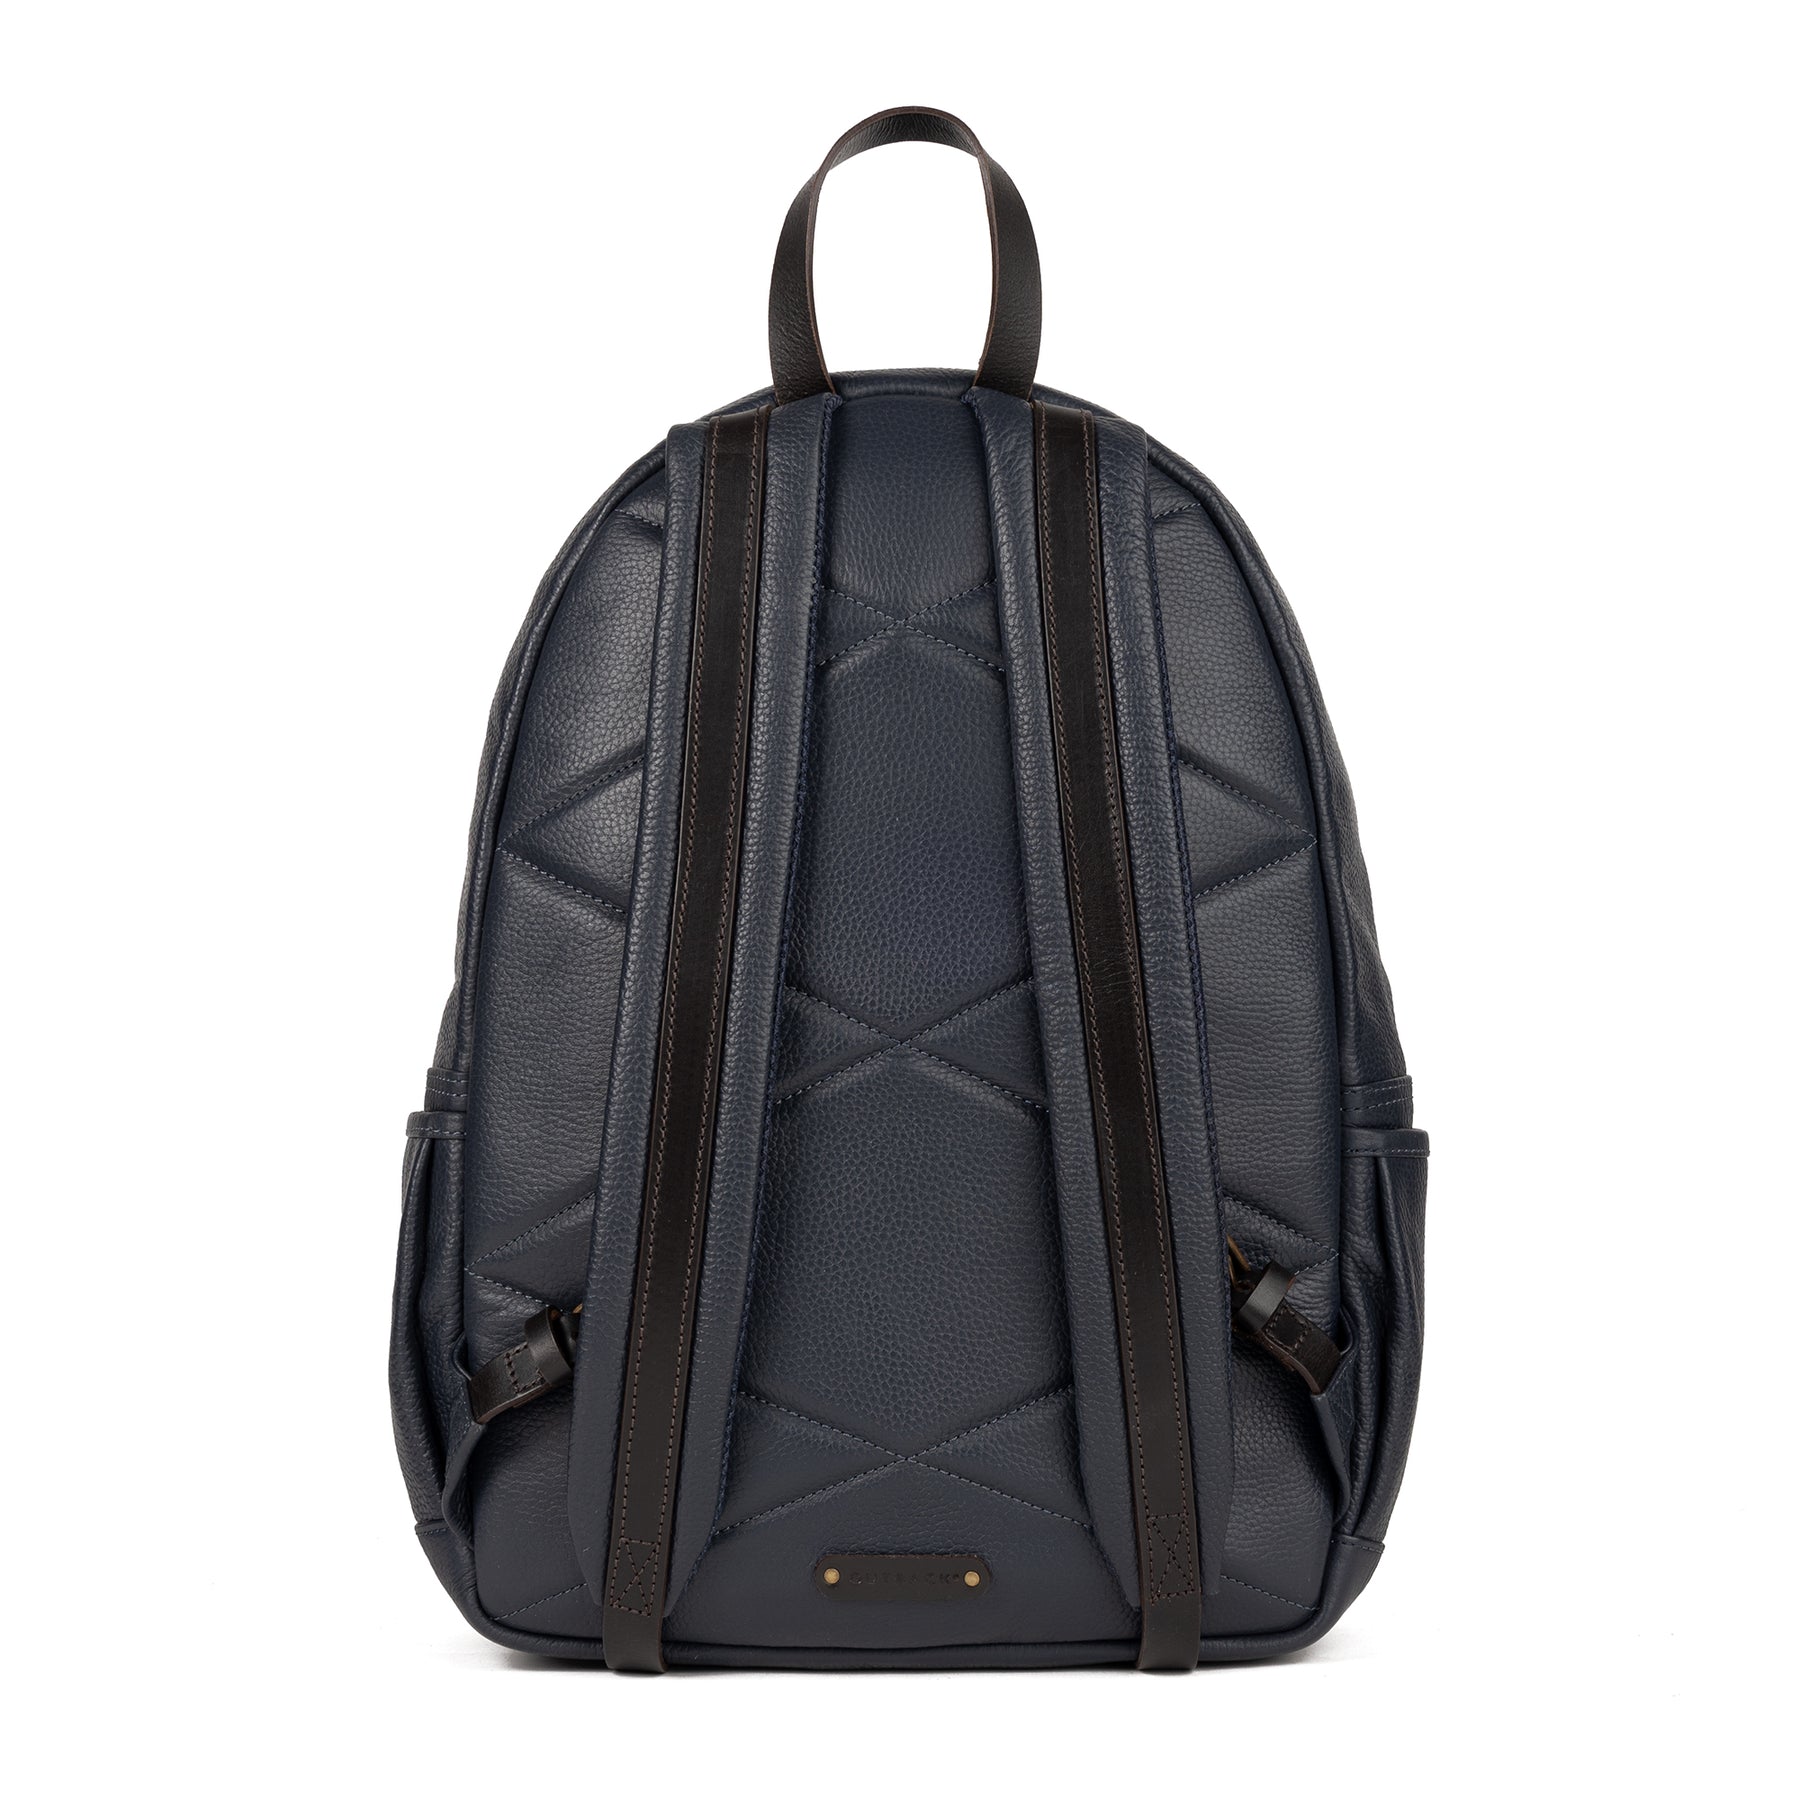 Unisex Leather Backpack Bag at Rs 3100 in Kanpur | ID: 17183852130